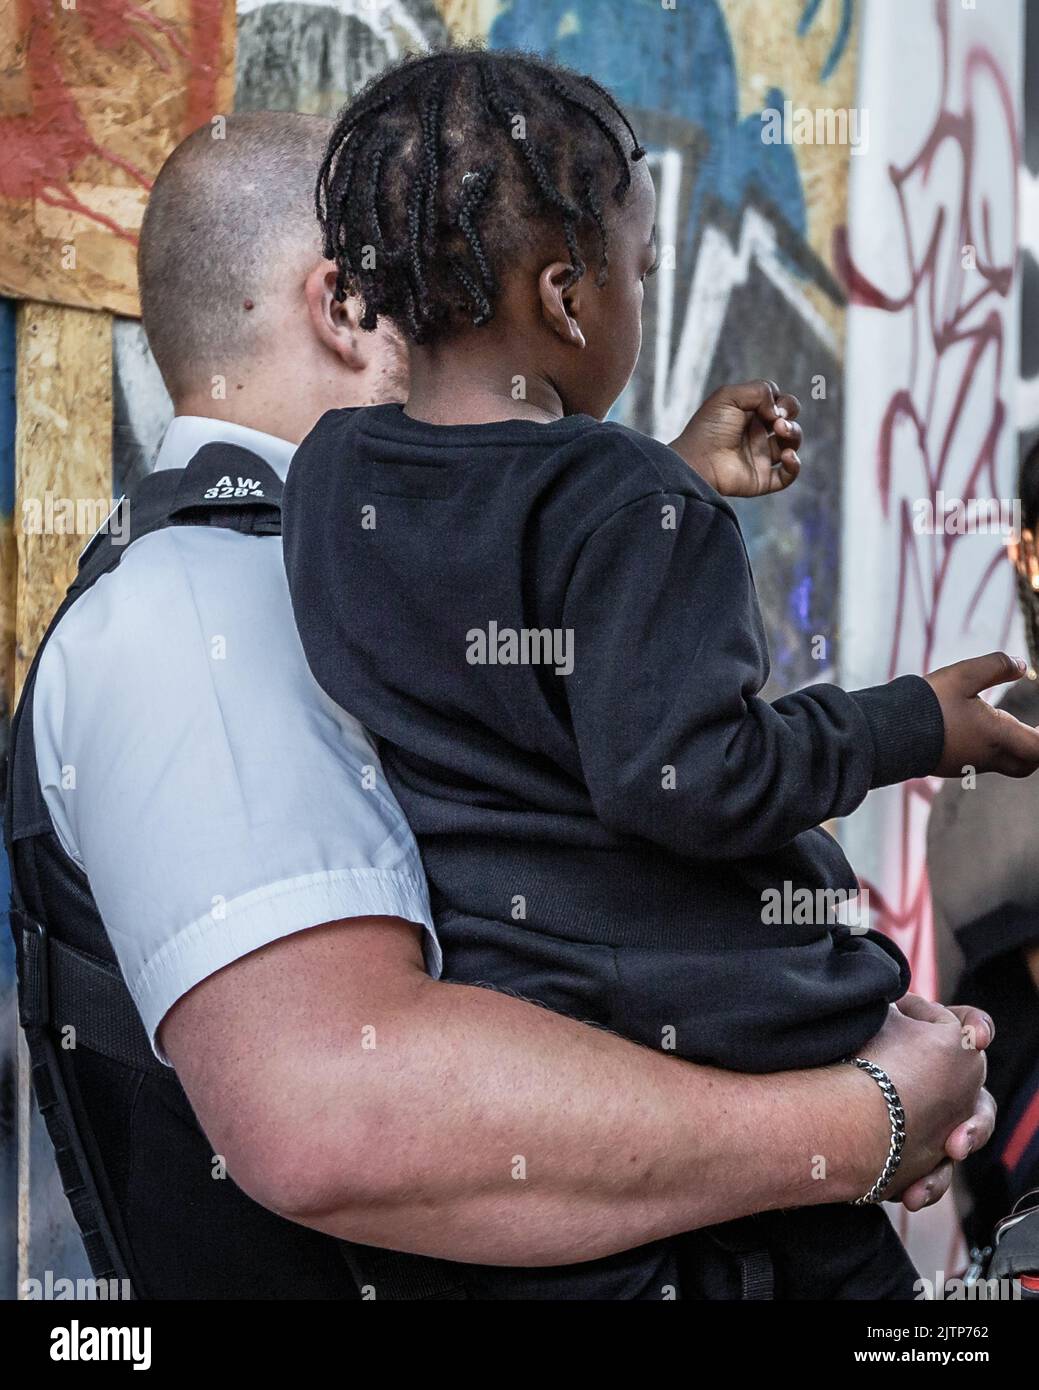 A police officer looks after a young child that has lost his parents at the Notting Hill Carnival. Stock Photo